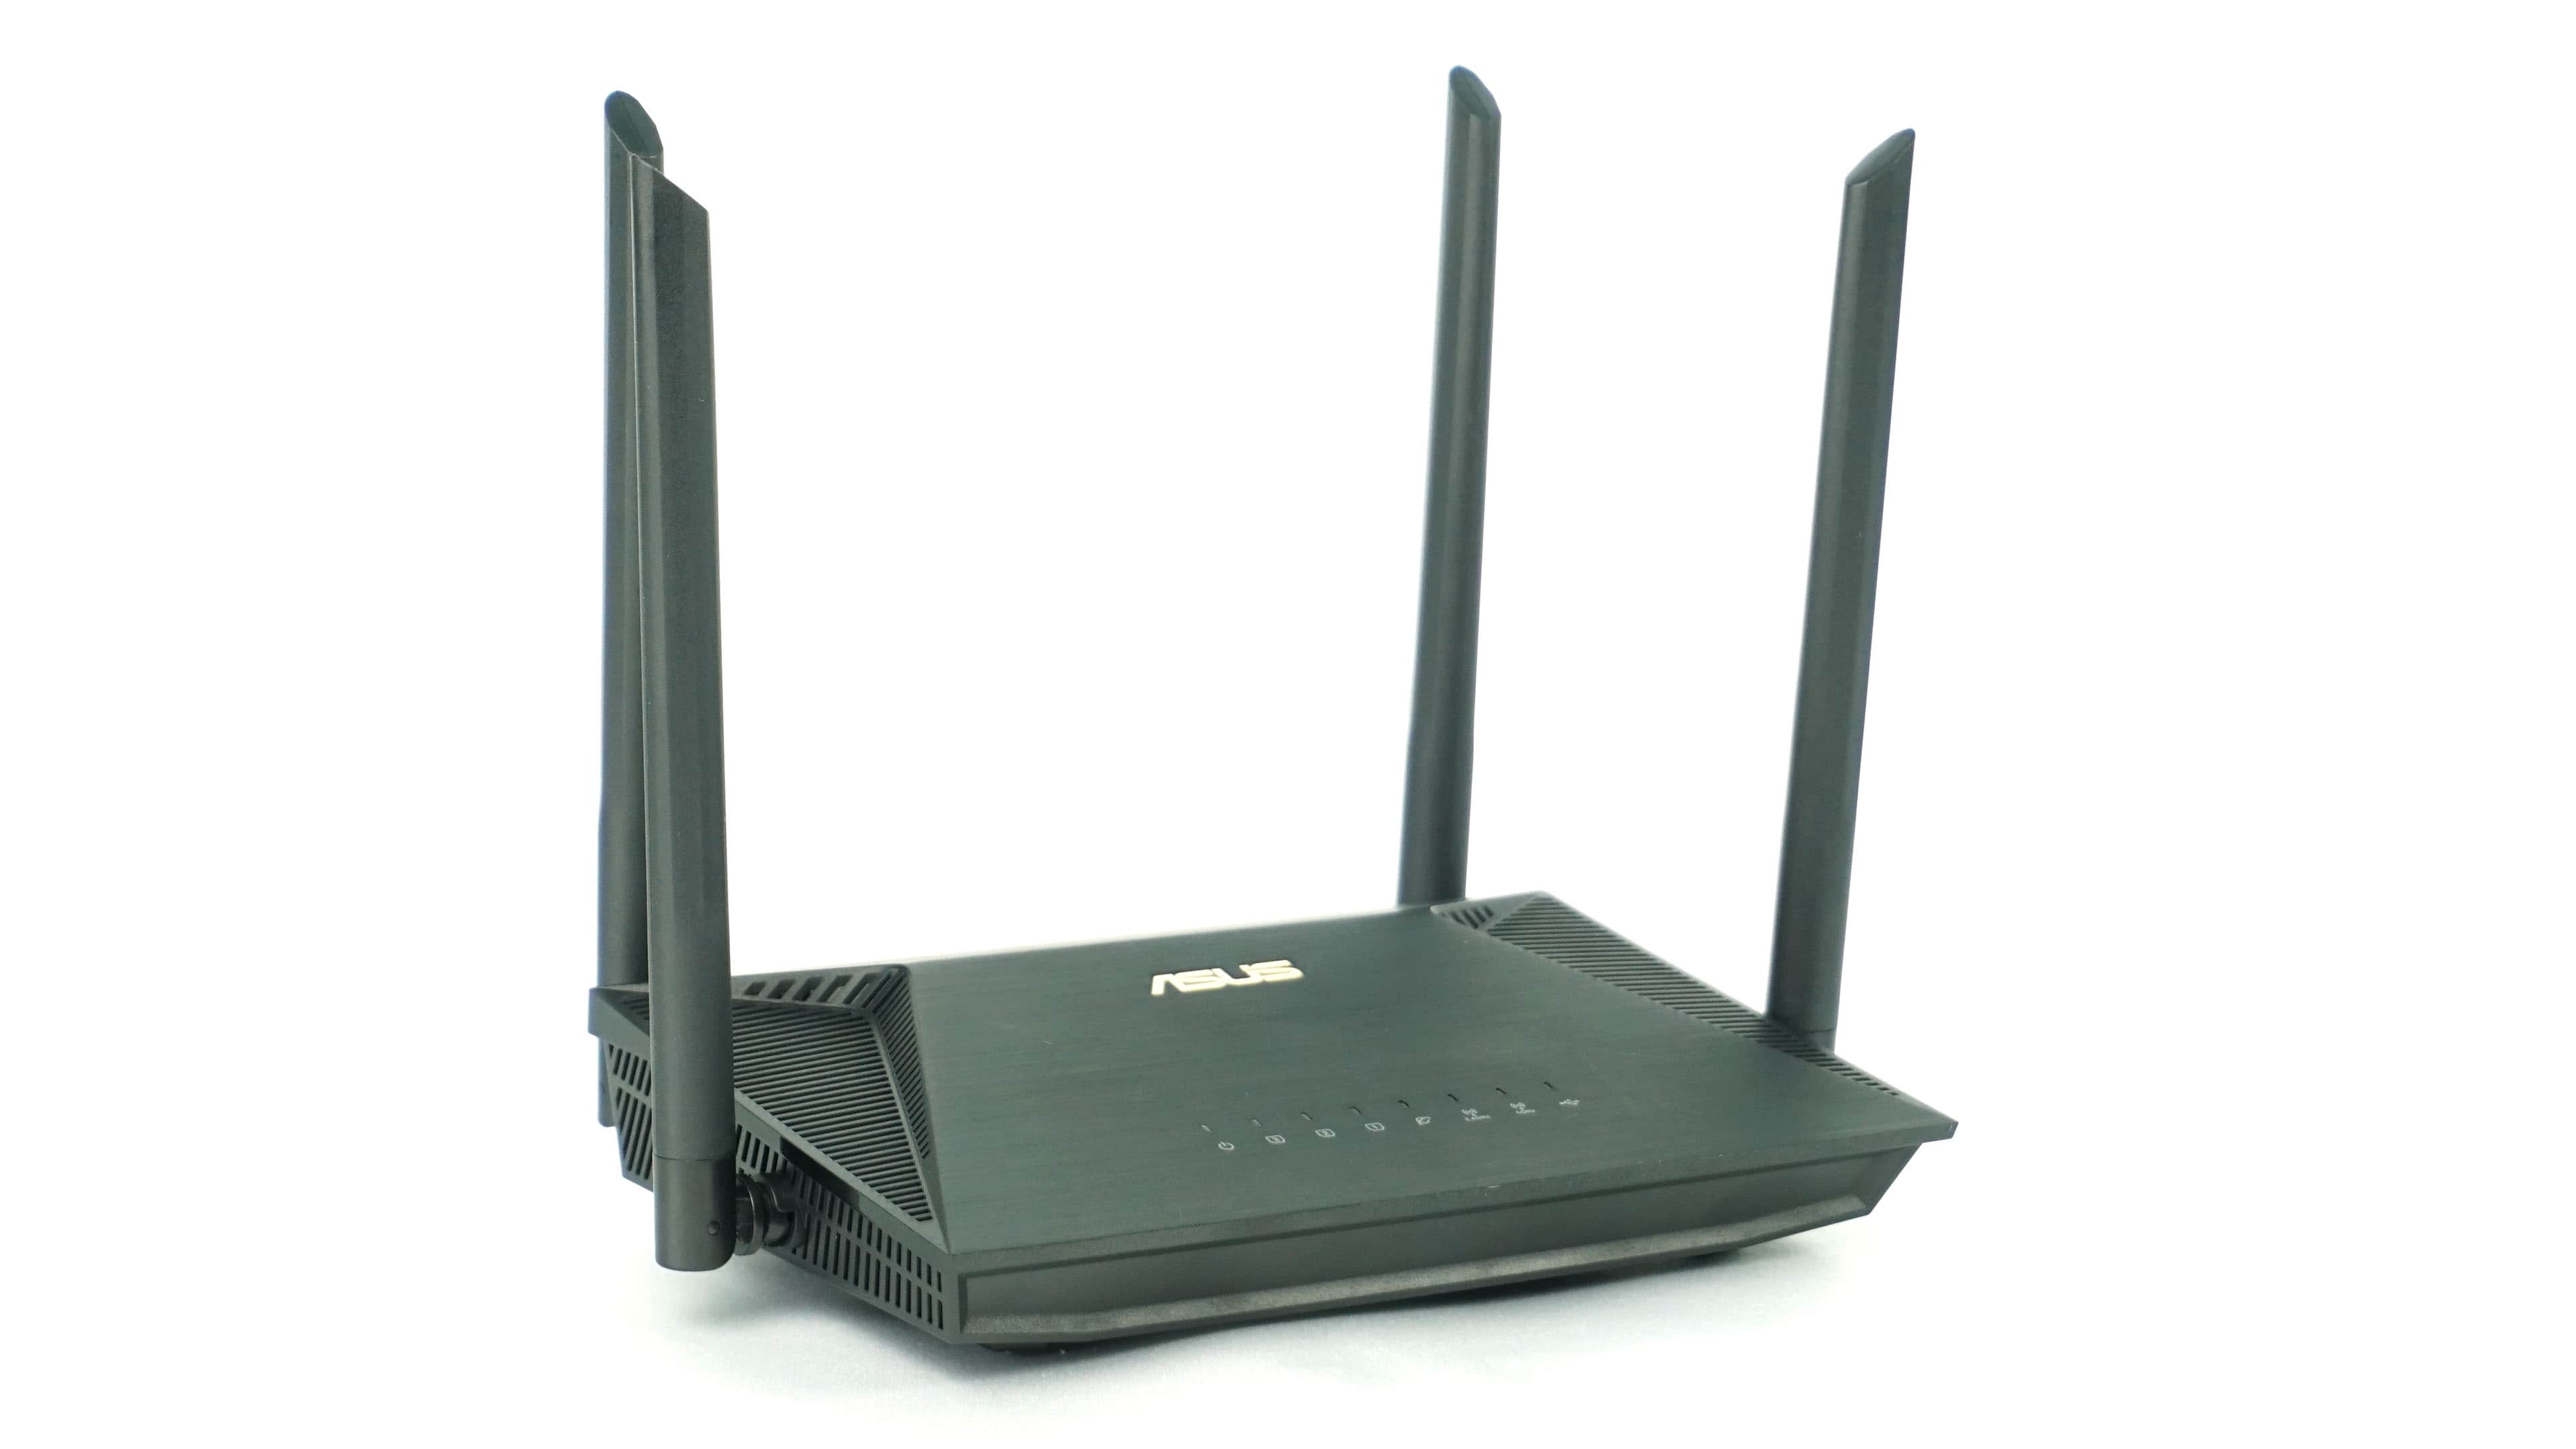 Asus RT-AX53U: Cheap router in the test, masses for 6 WiFi or